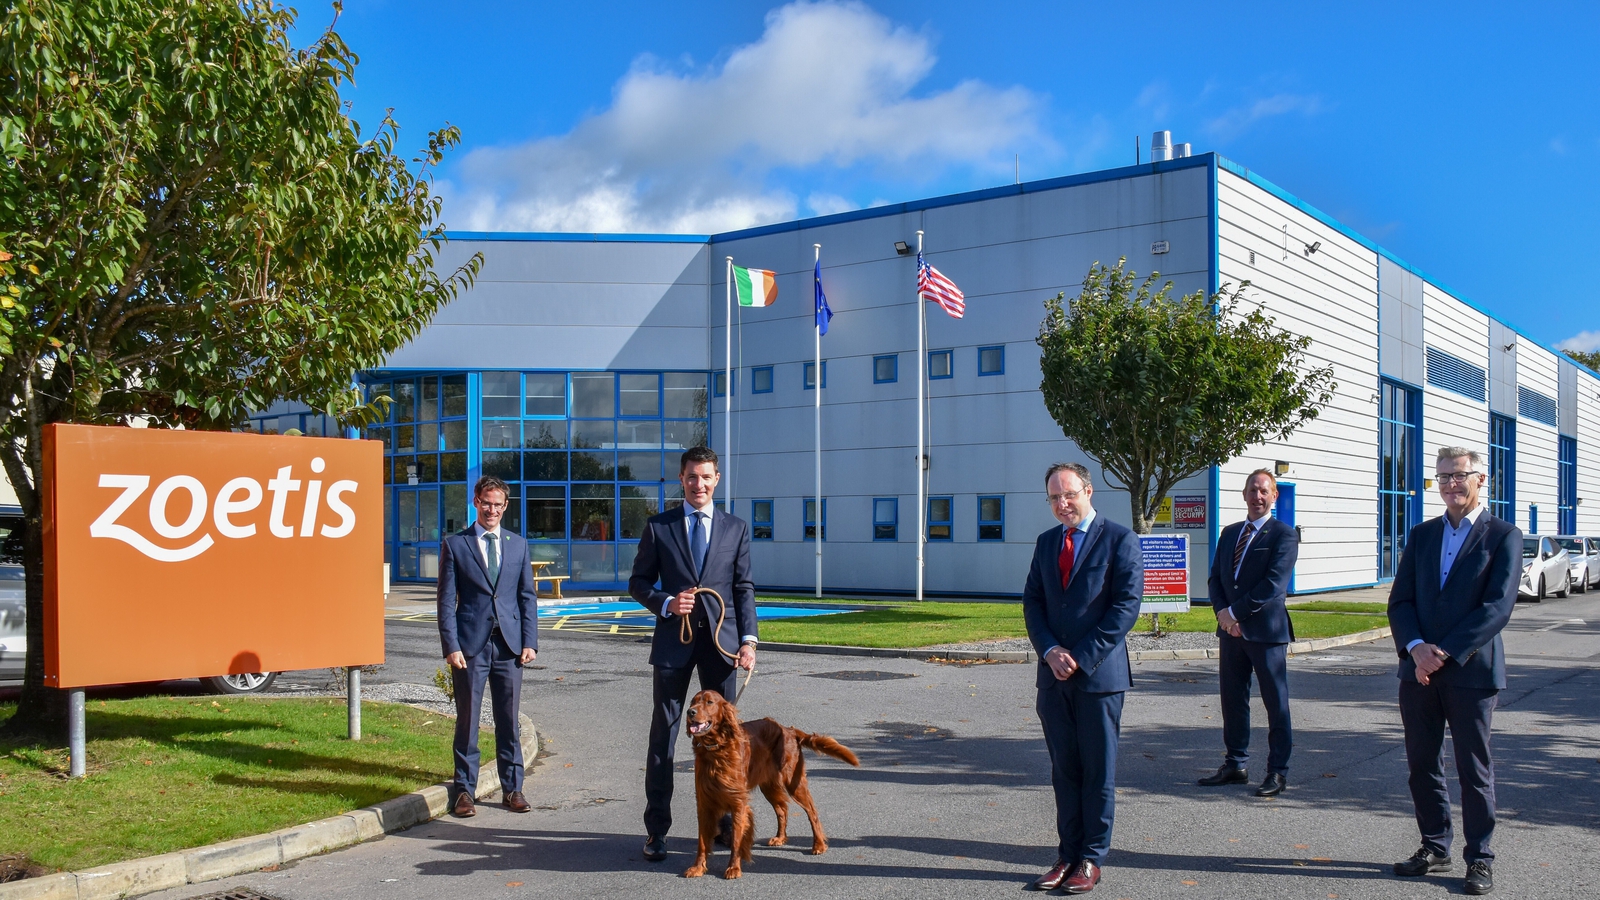 Zoetis To Create Up To 100 Jobs In Tullamore